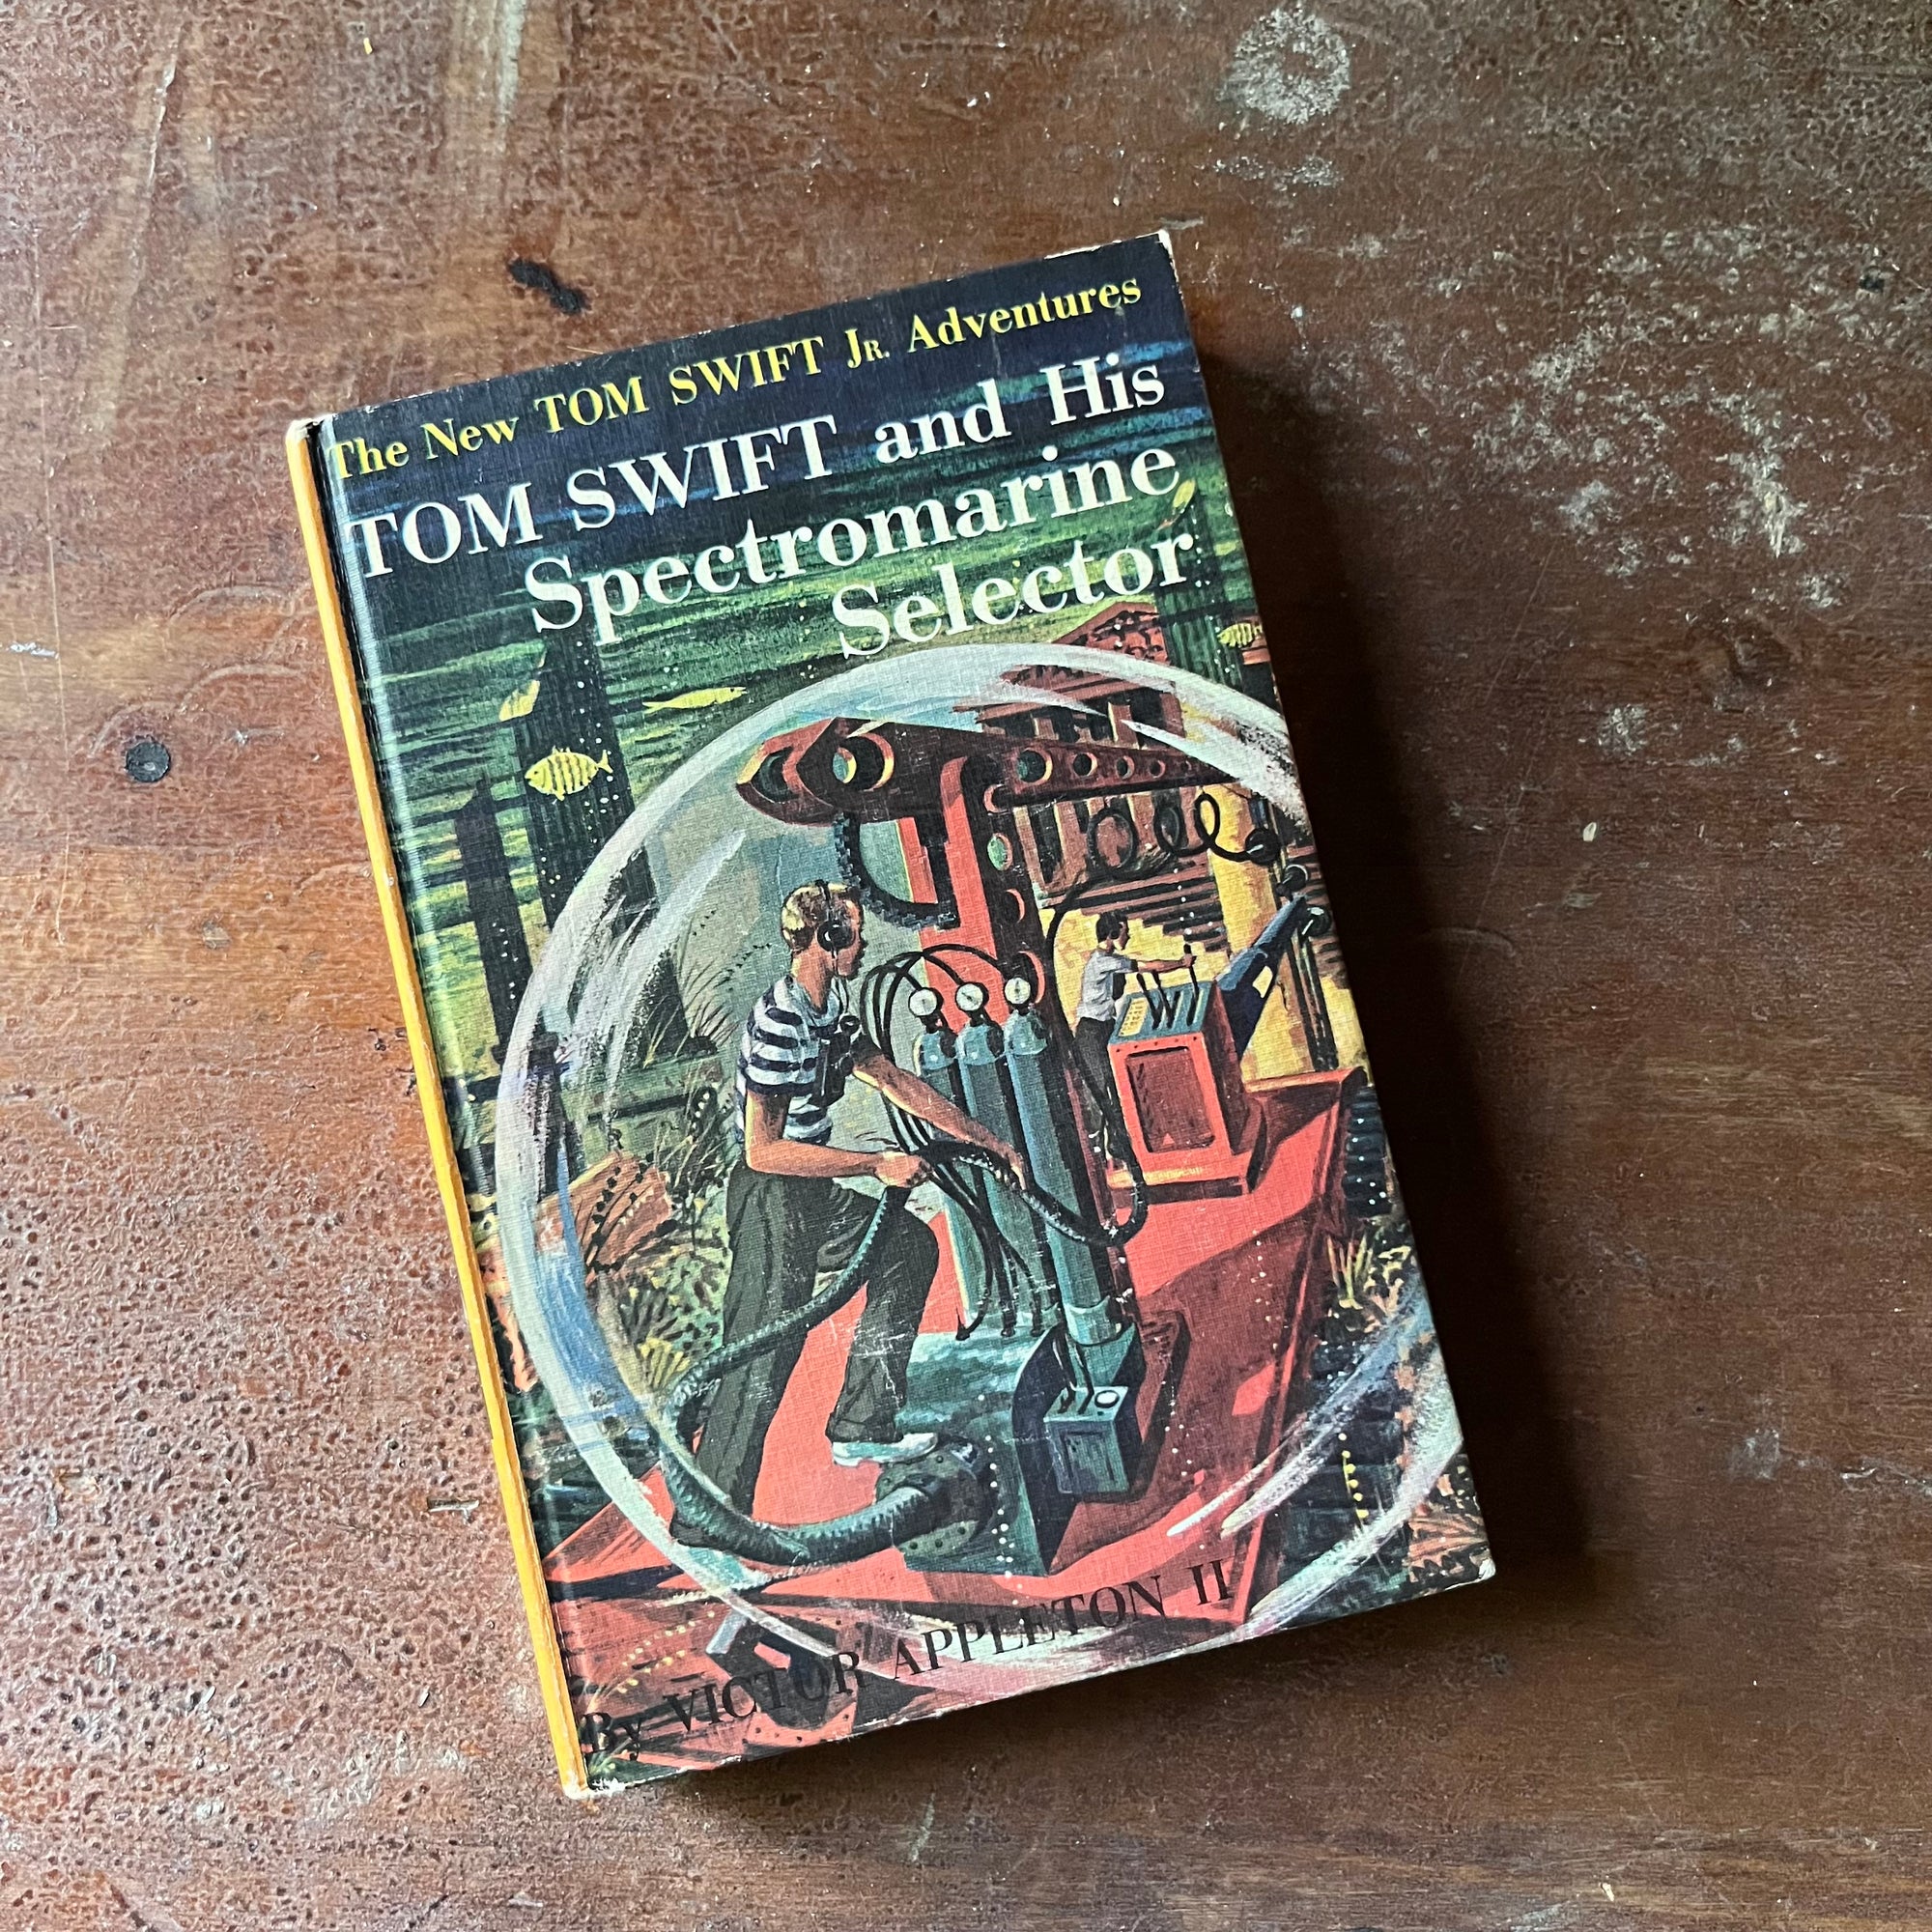 vintage children's chapter book, vintage adventure book, homeschool library, The New Tom Swift Jr. Adventures Book - Tom Swift and His Spectromarine Selector written by Victor Appleton II with illustrations by Graham Kaye - view of the front cover